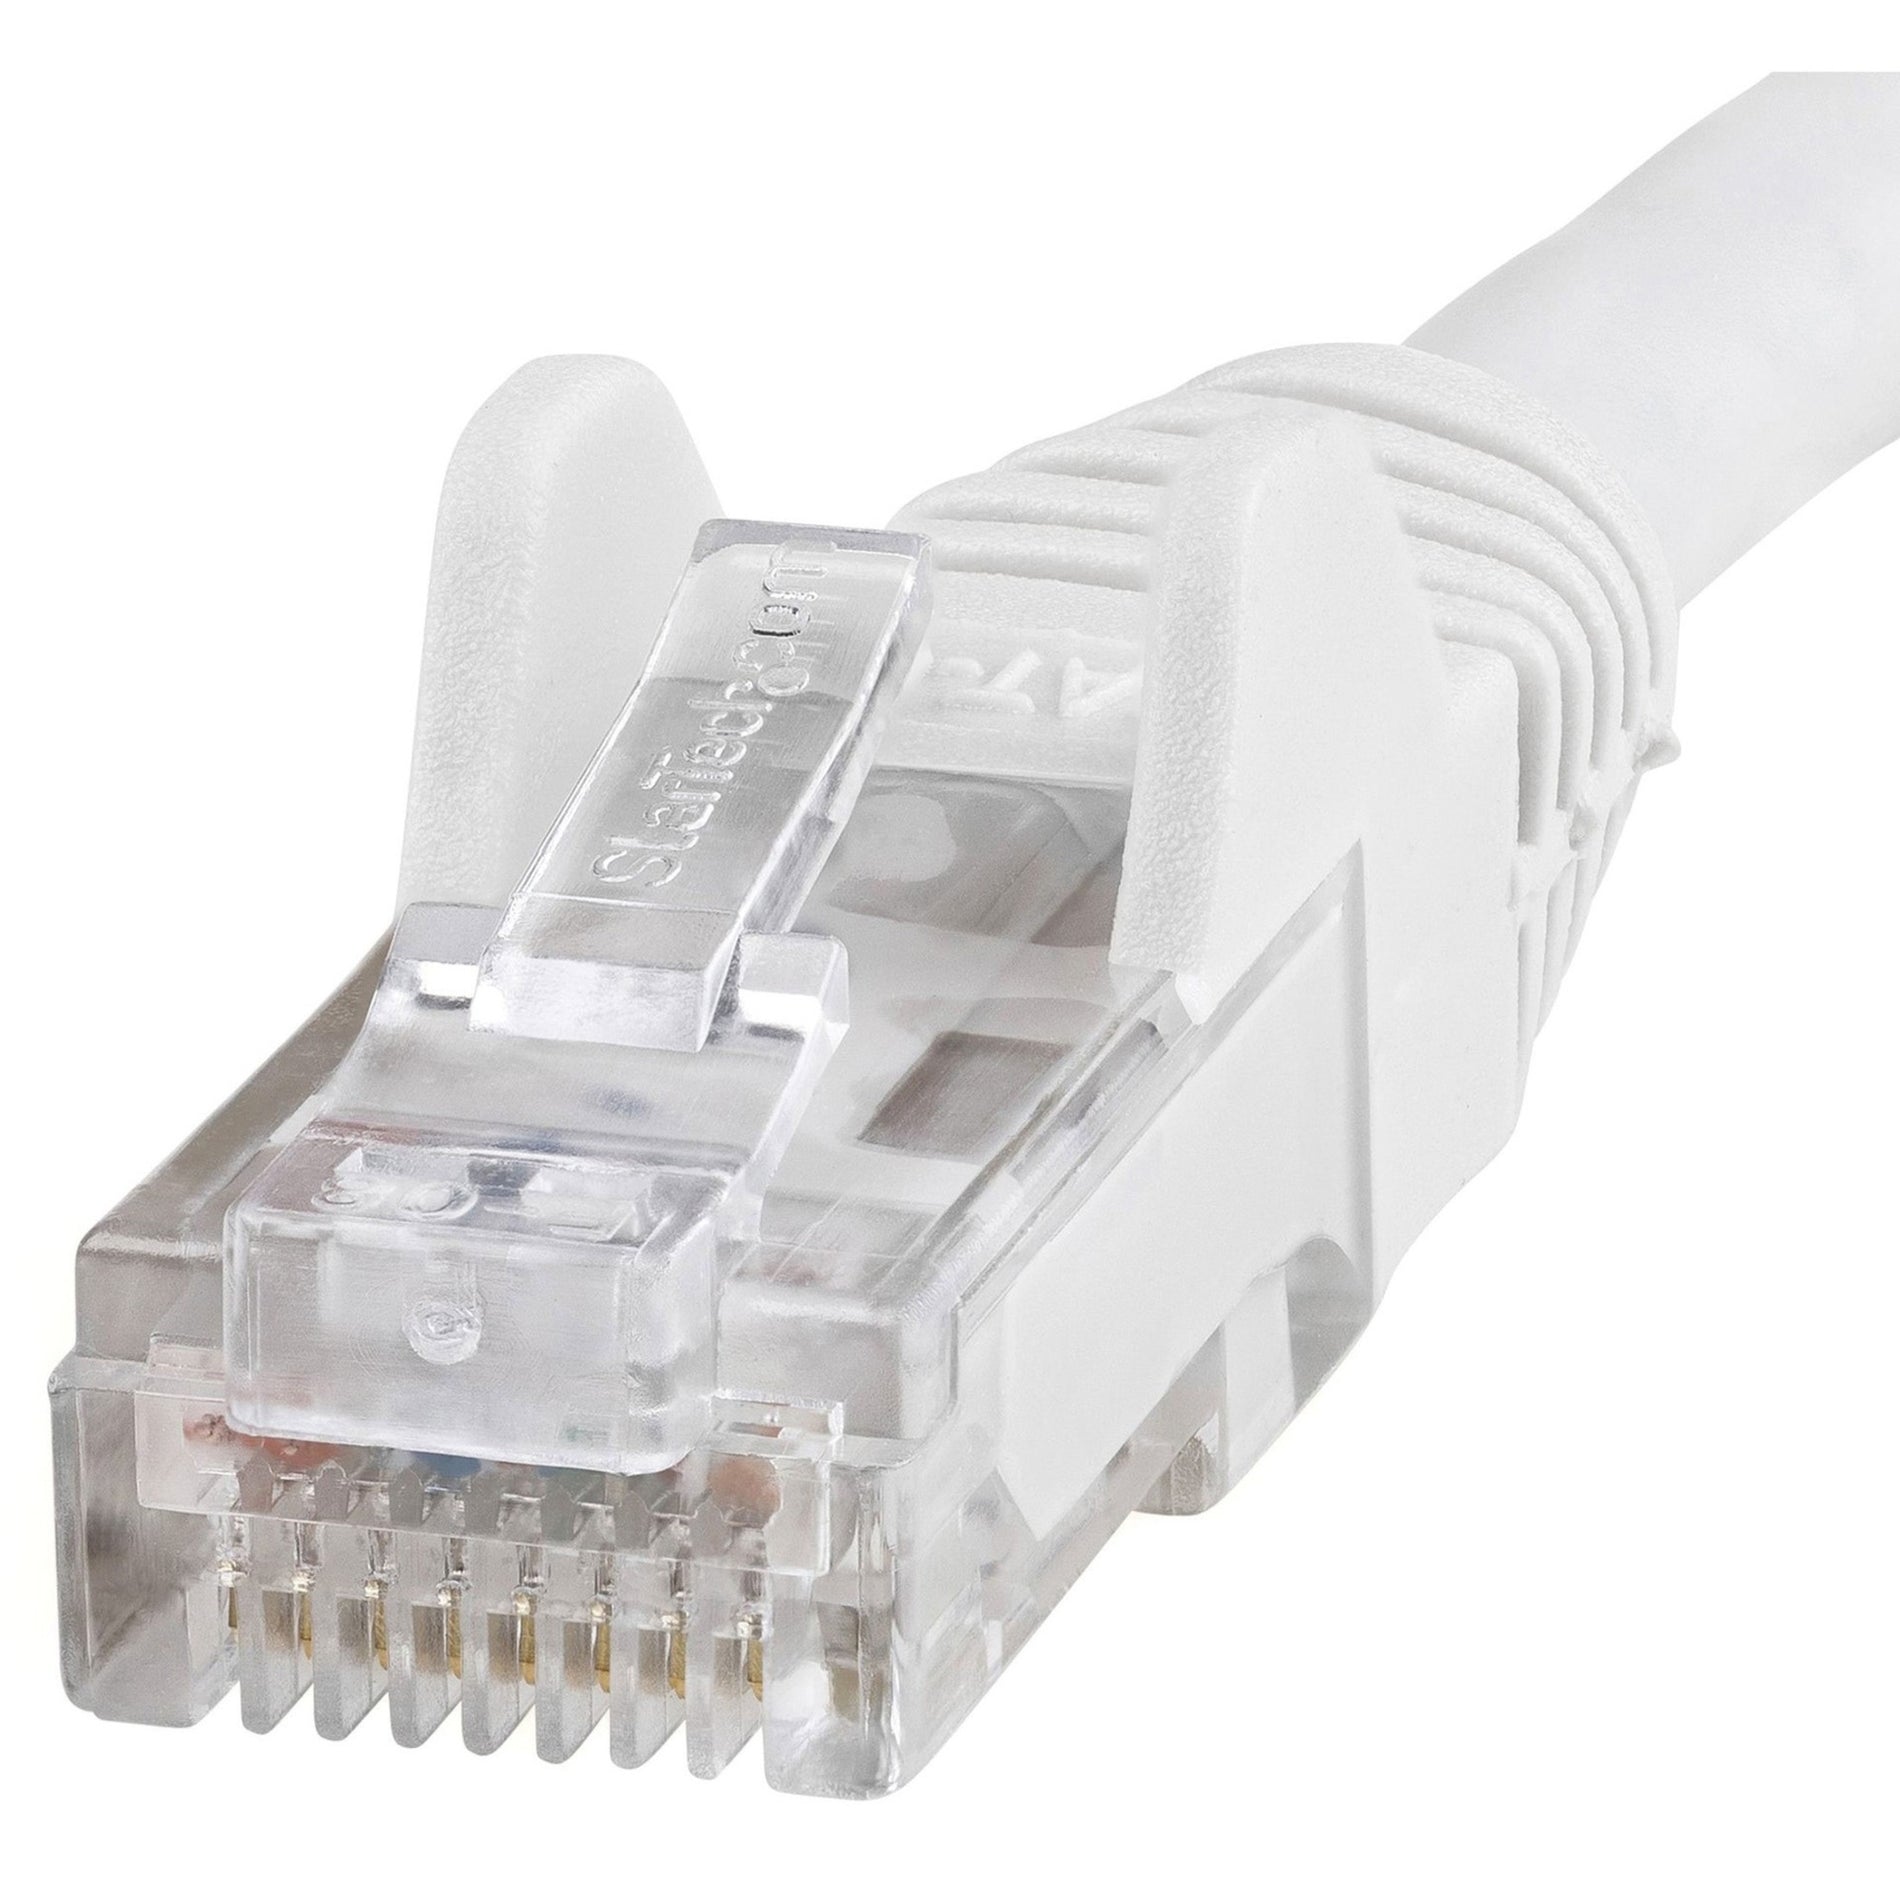 StarTech.com N6PATCH2WH Cat. 6 Network Cable, 2ft White Cat6 Patch Cable with Snagless RJ45 Connectors, Ethernet Cable